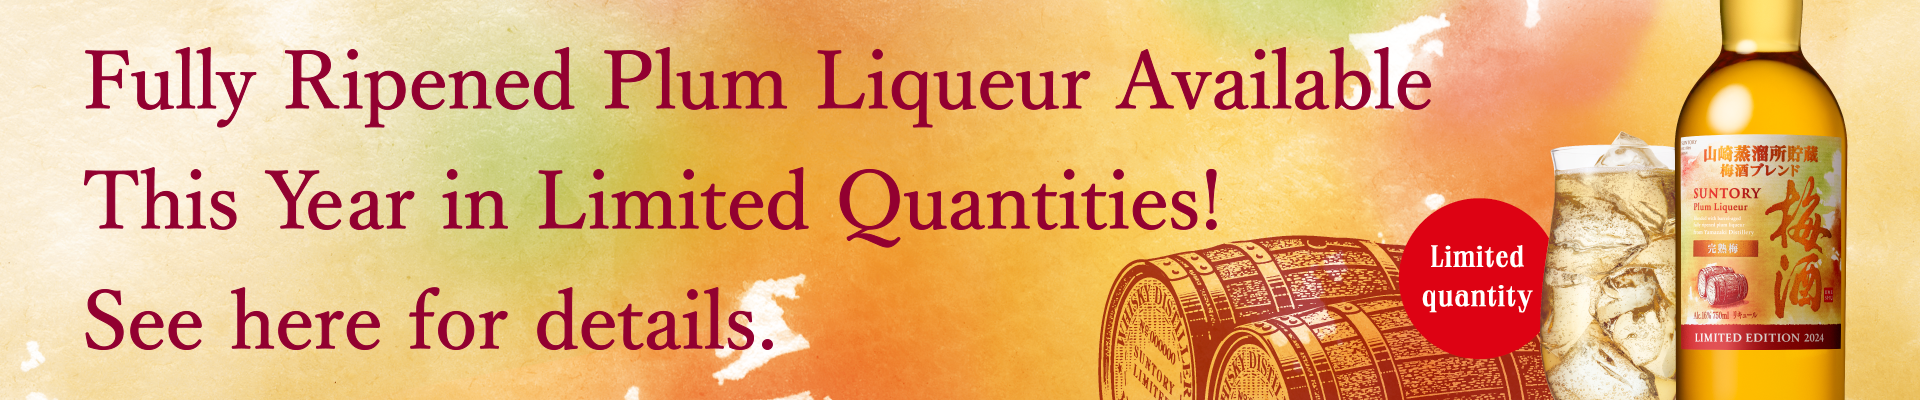 Fully Ripened Plum Liqueur Available This Year in Limited Quantities! See here for details.